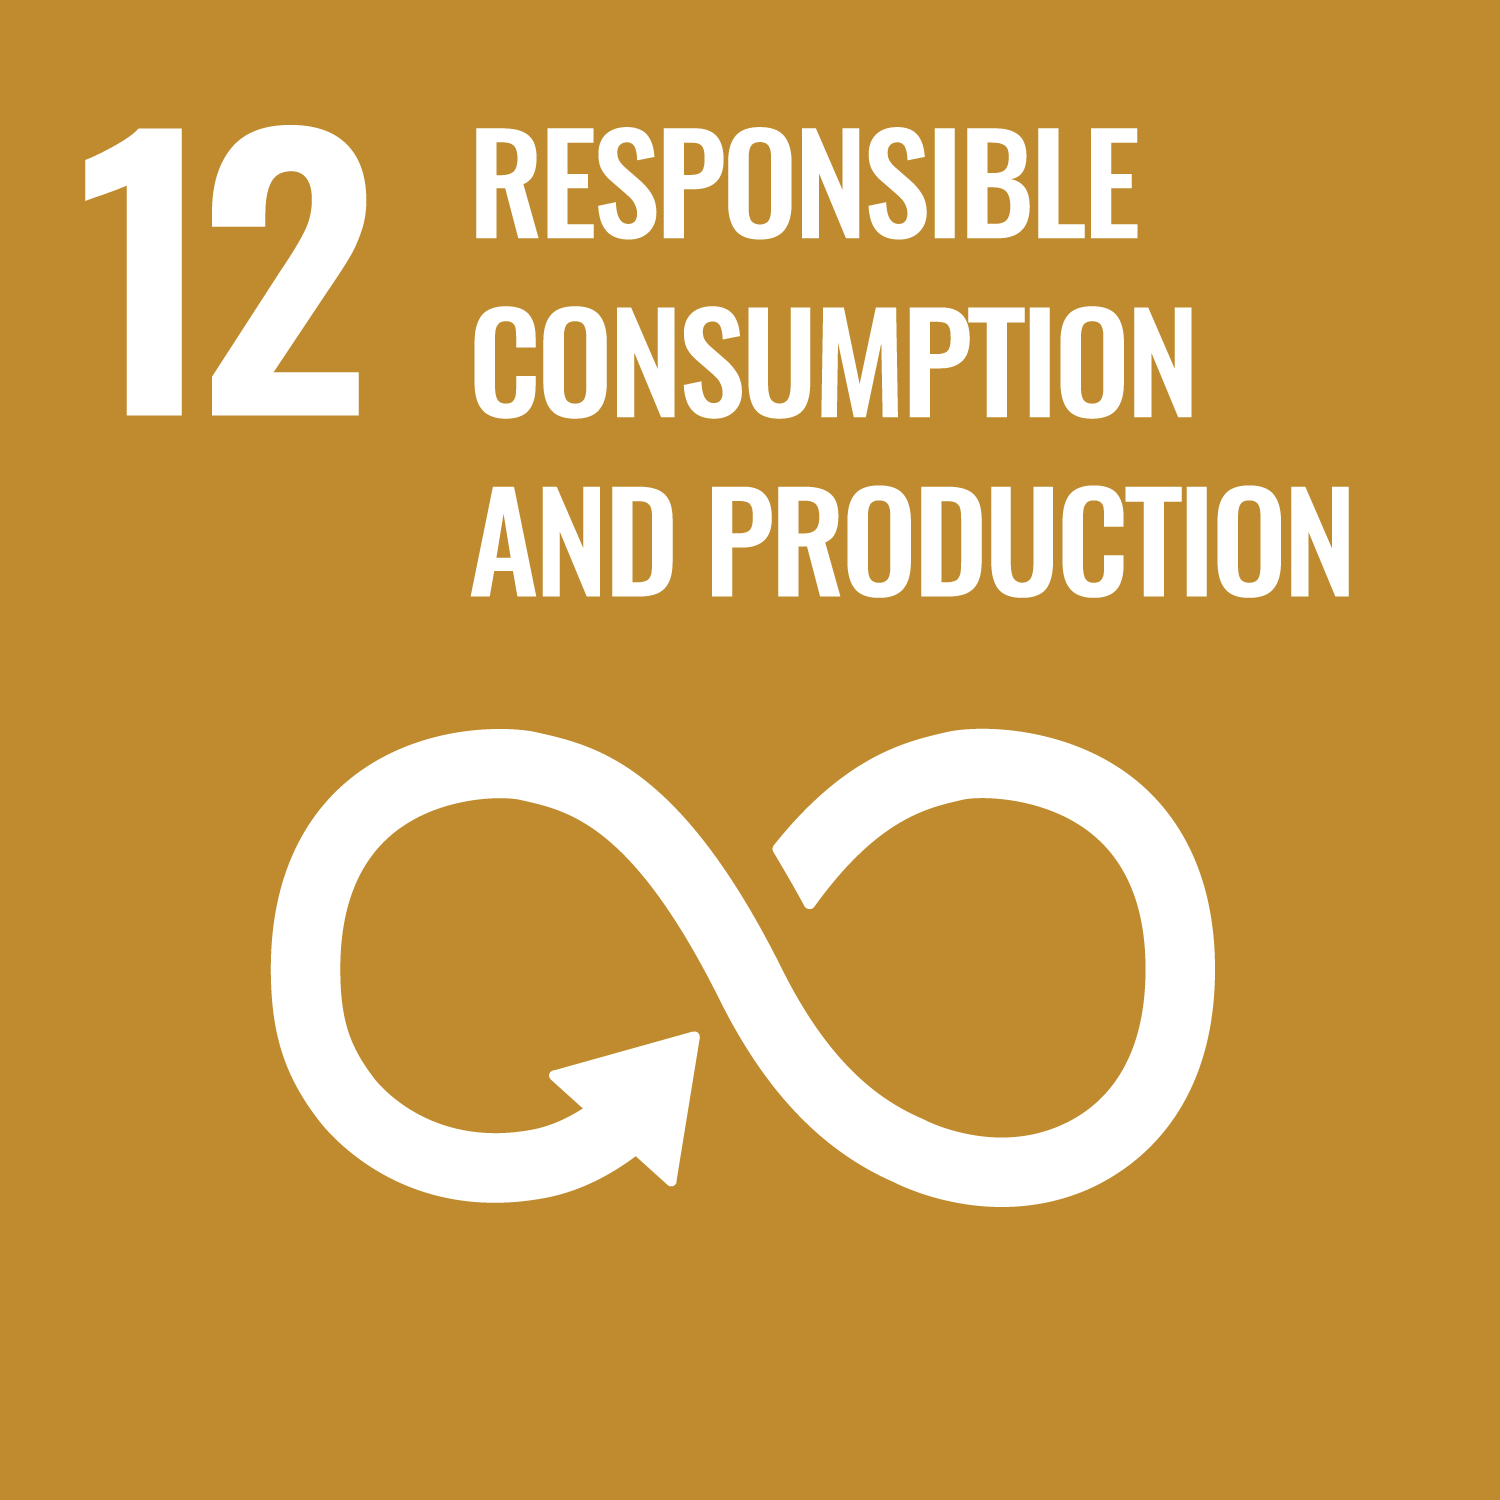 United Nations SDG Goals for Responsable Consumption and Production